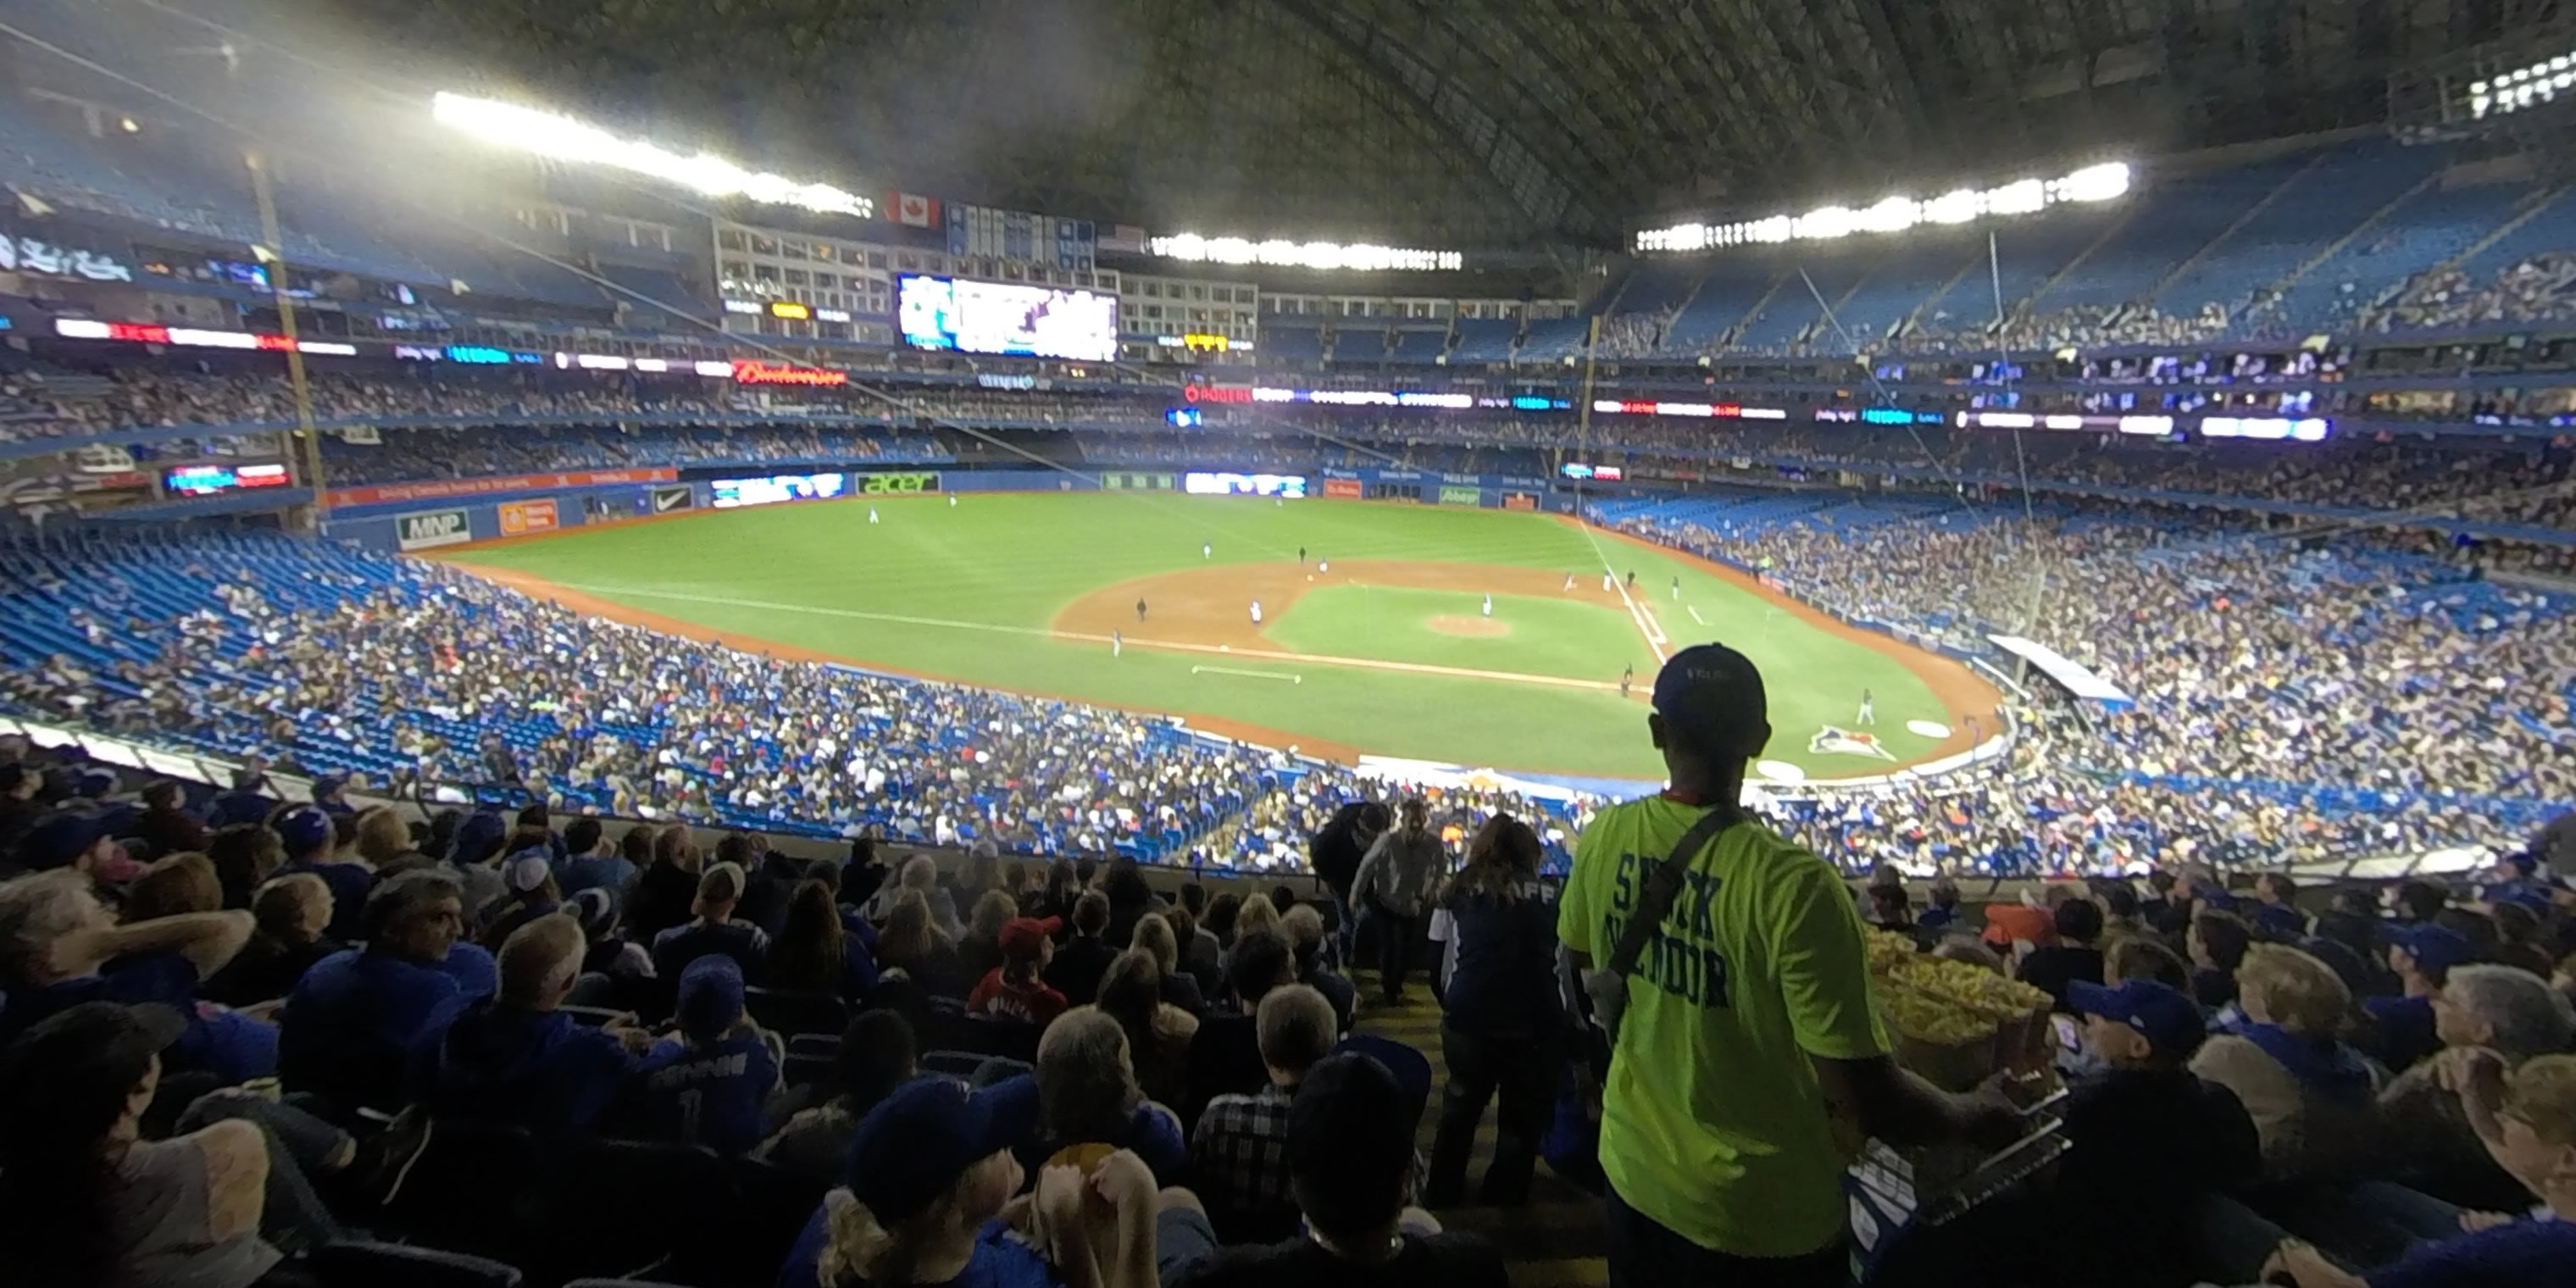 section 228 panoramic seat view  for baseball - rogers centre